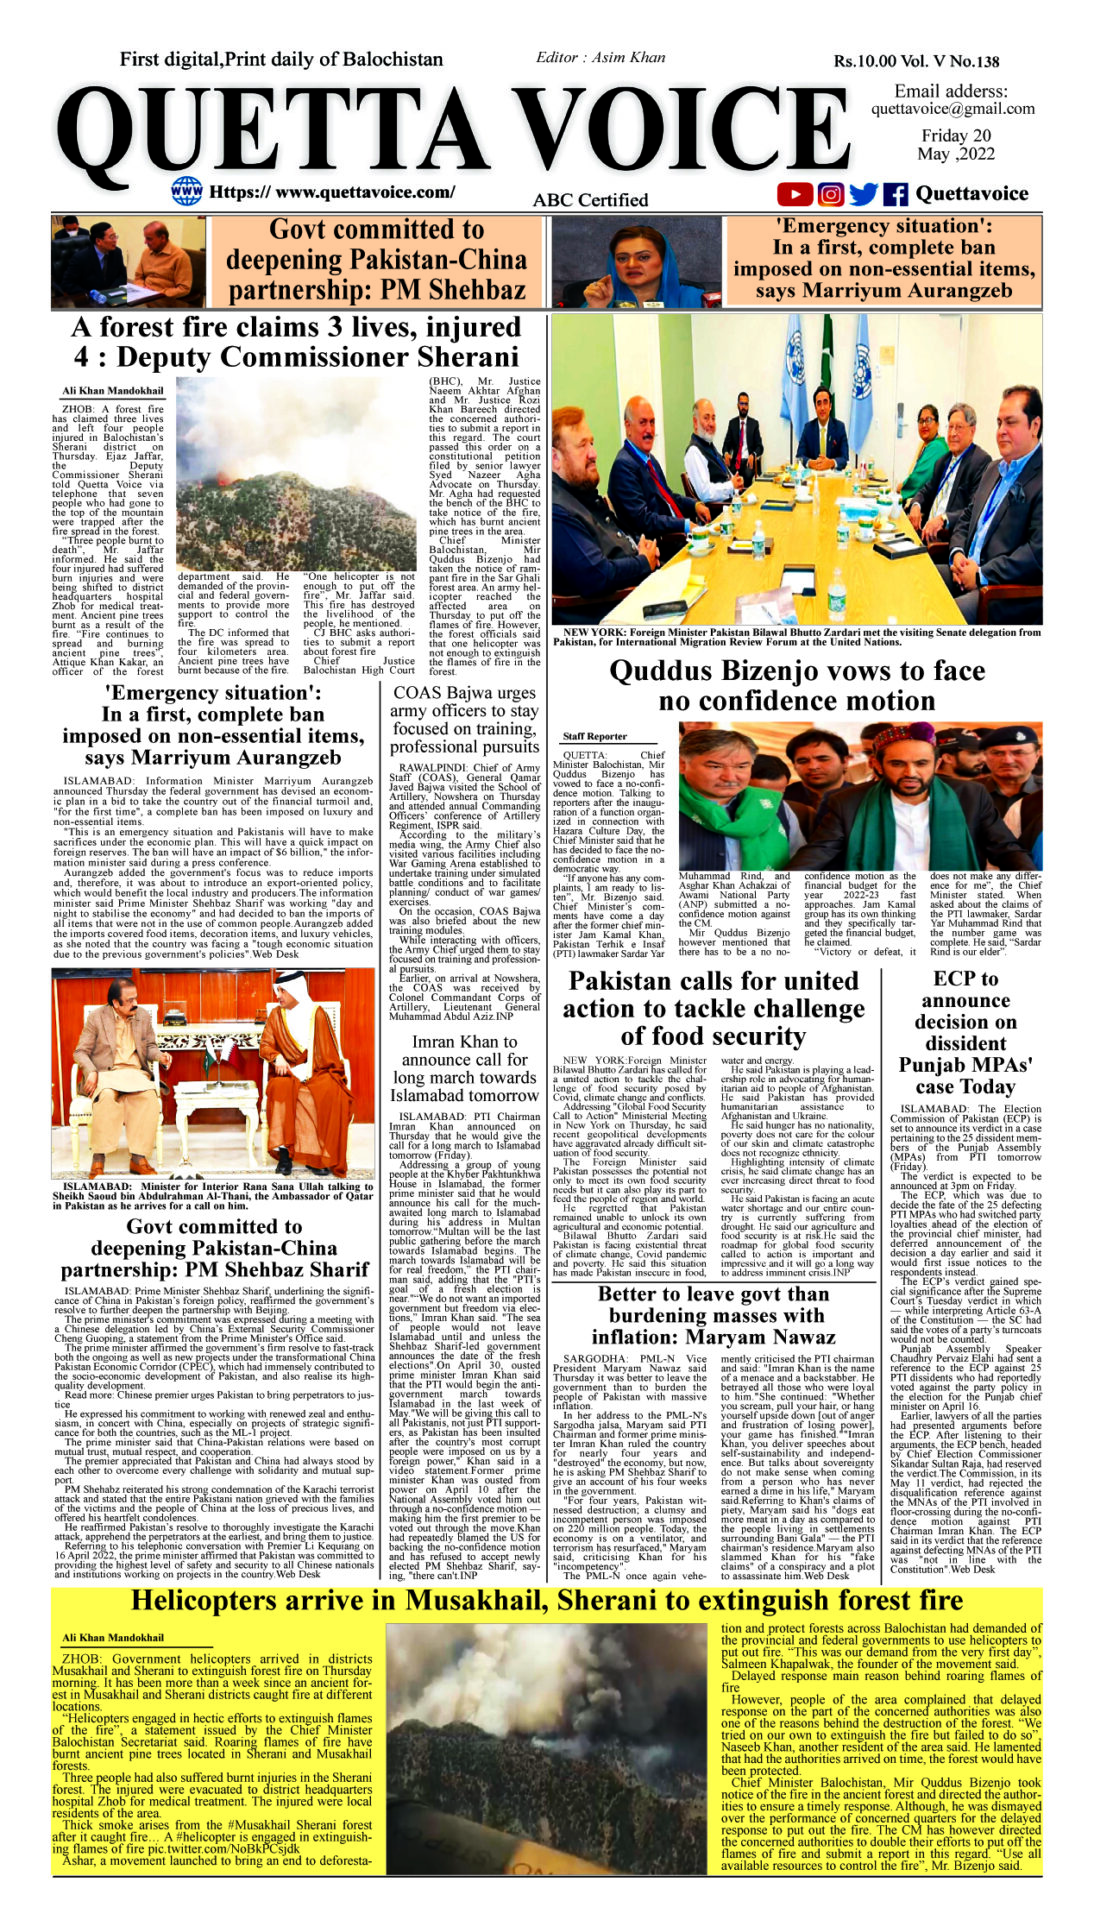 Today's Quetta Voice Newspaper, May 20, 2022